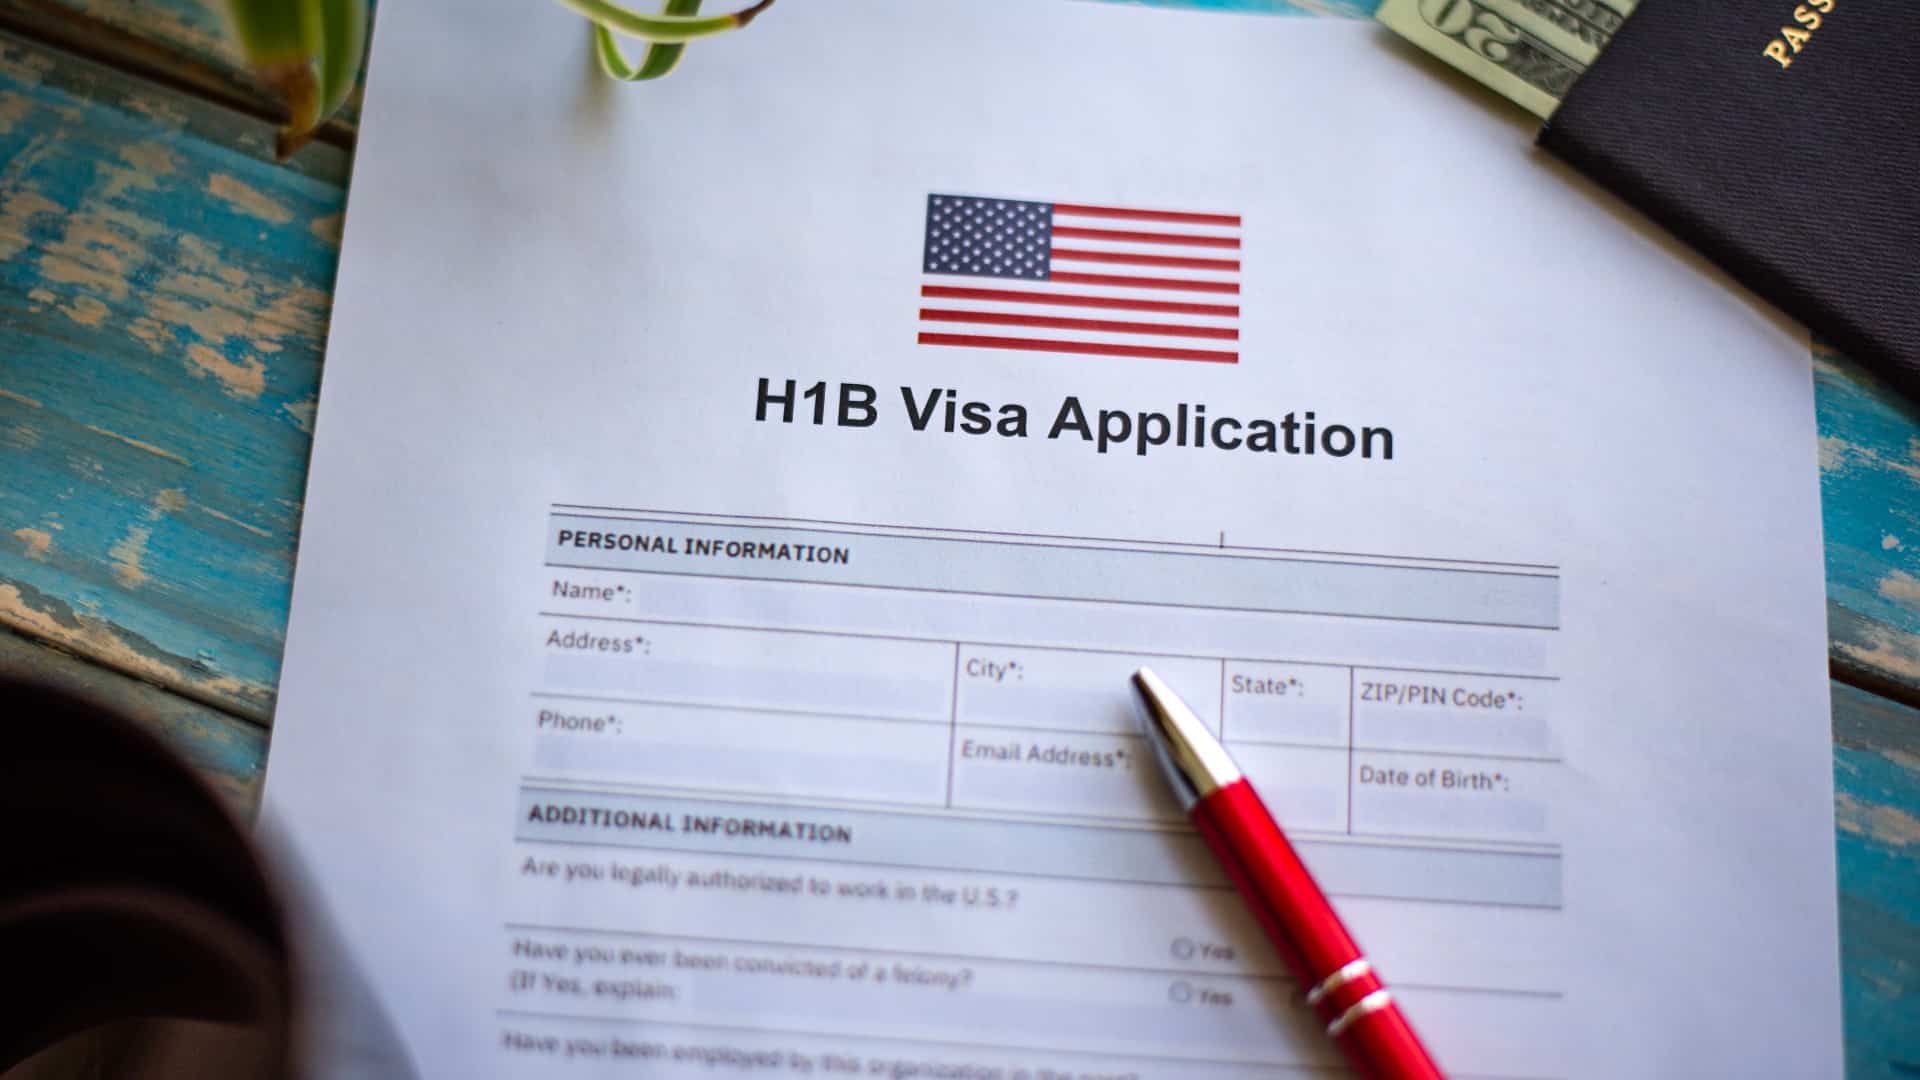 Infosys records increase in approval rates for H-1B visa applications for US